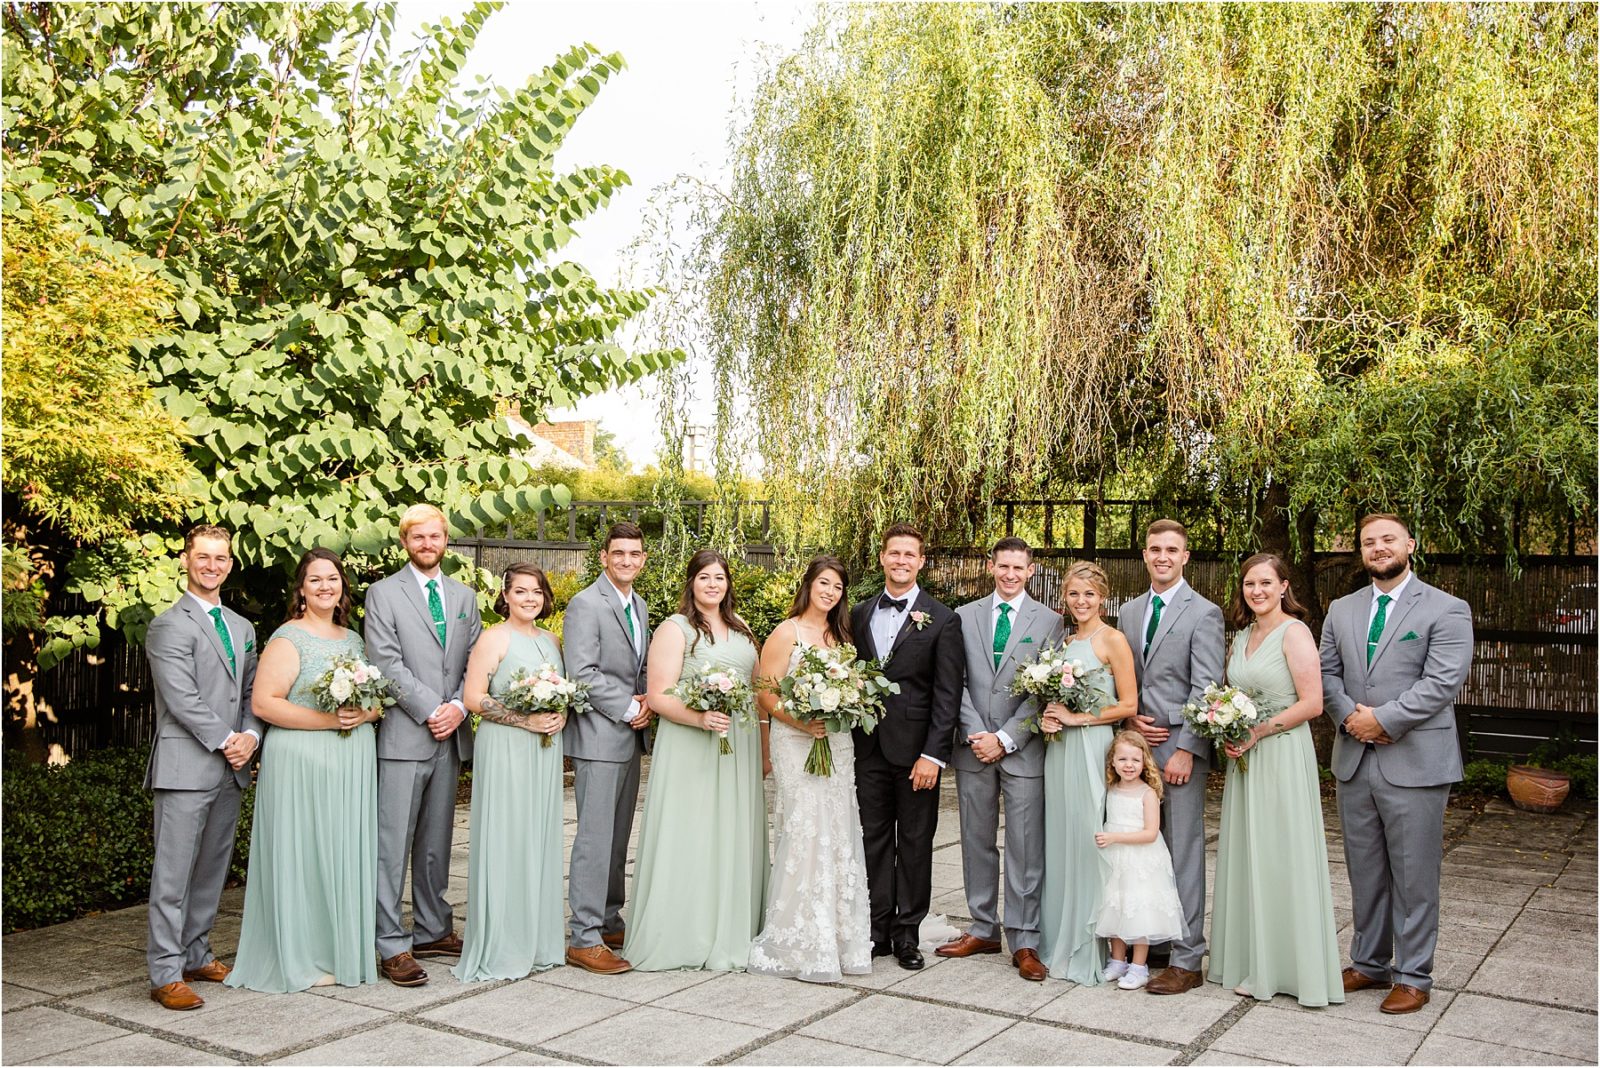 Groom and bride with full bridal party